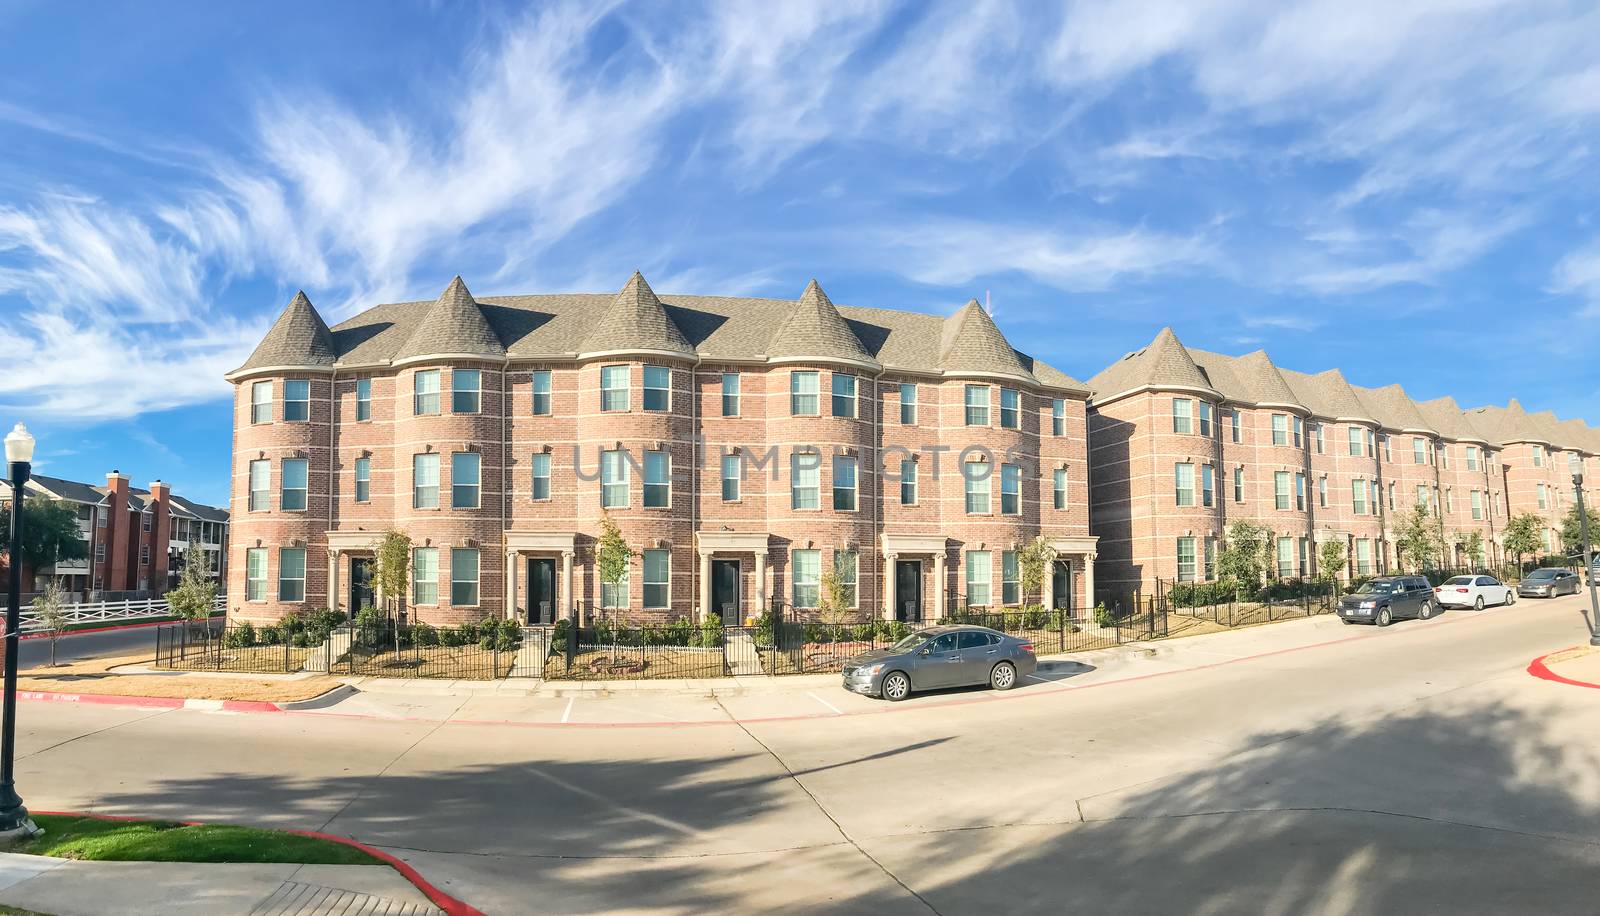 Panorama view new townhome apartment complex with cars park on street near Dallas, Texas, USA